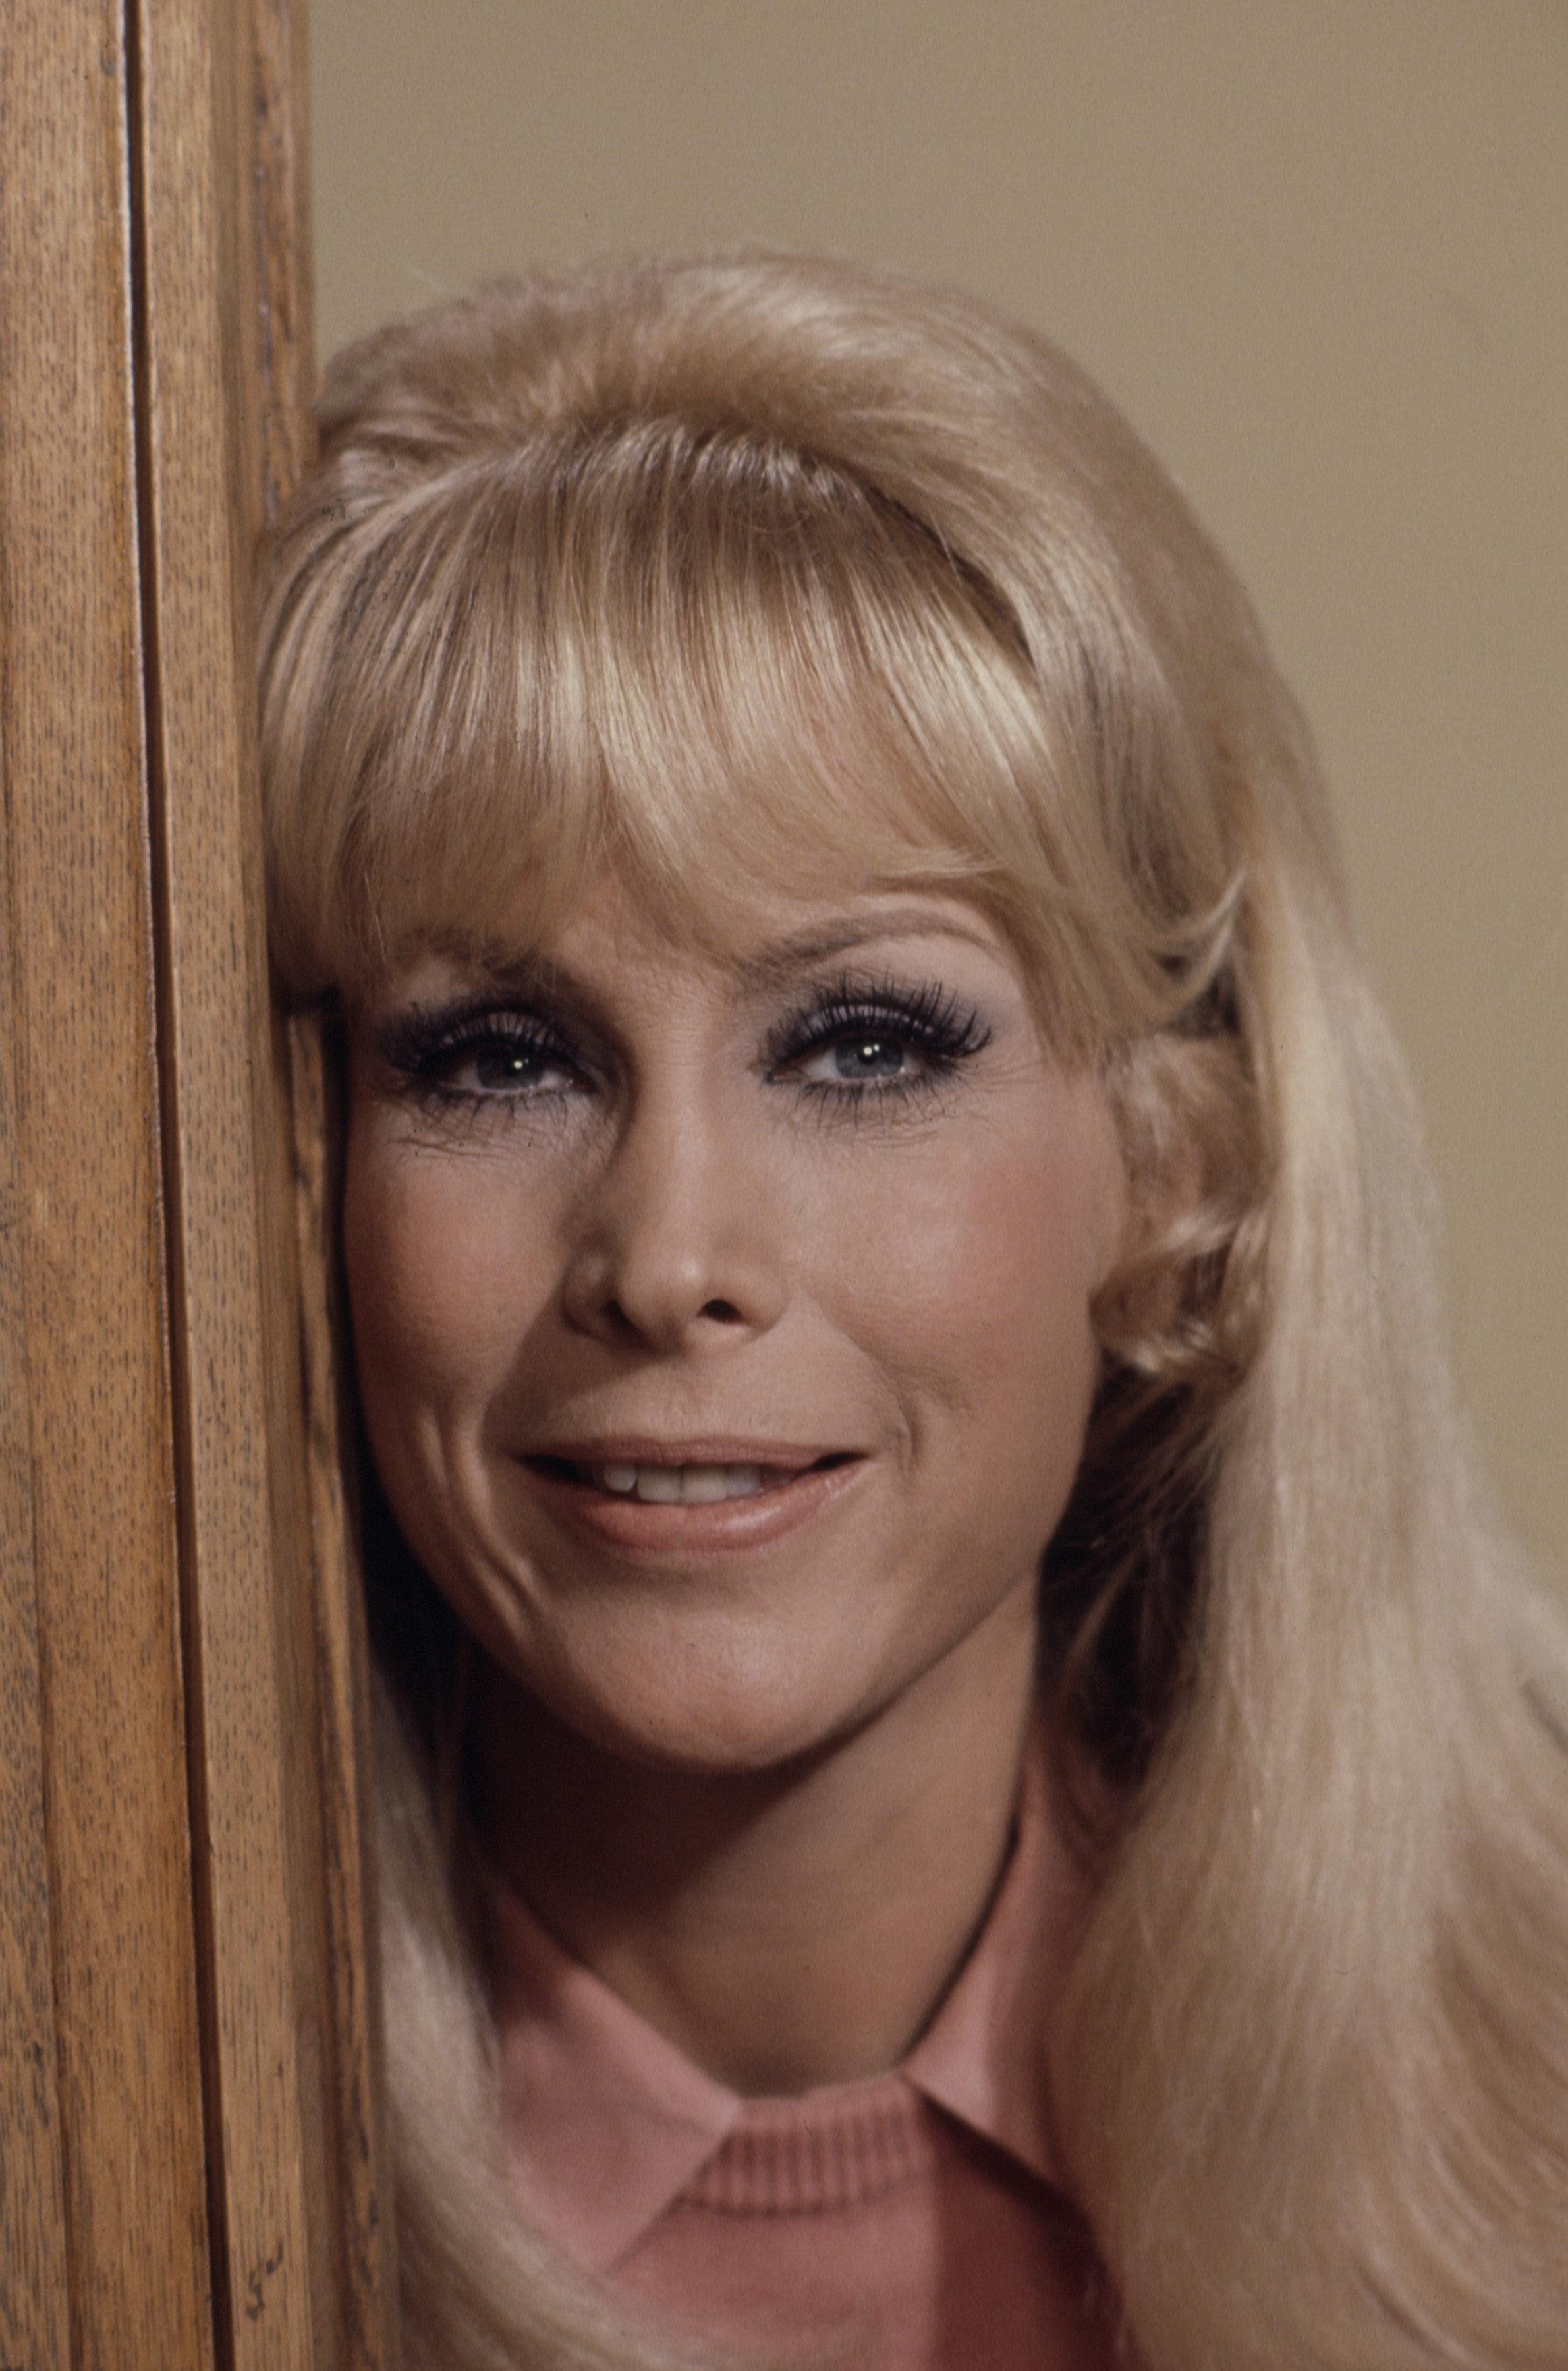 Barbara Eden's promotional photo for the ABC TV movie "Let's Switch!" in 1975. | Source: Getty Images